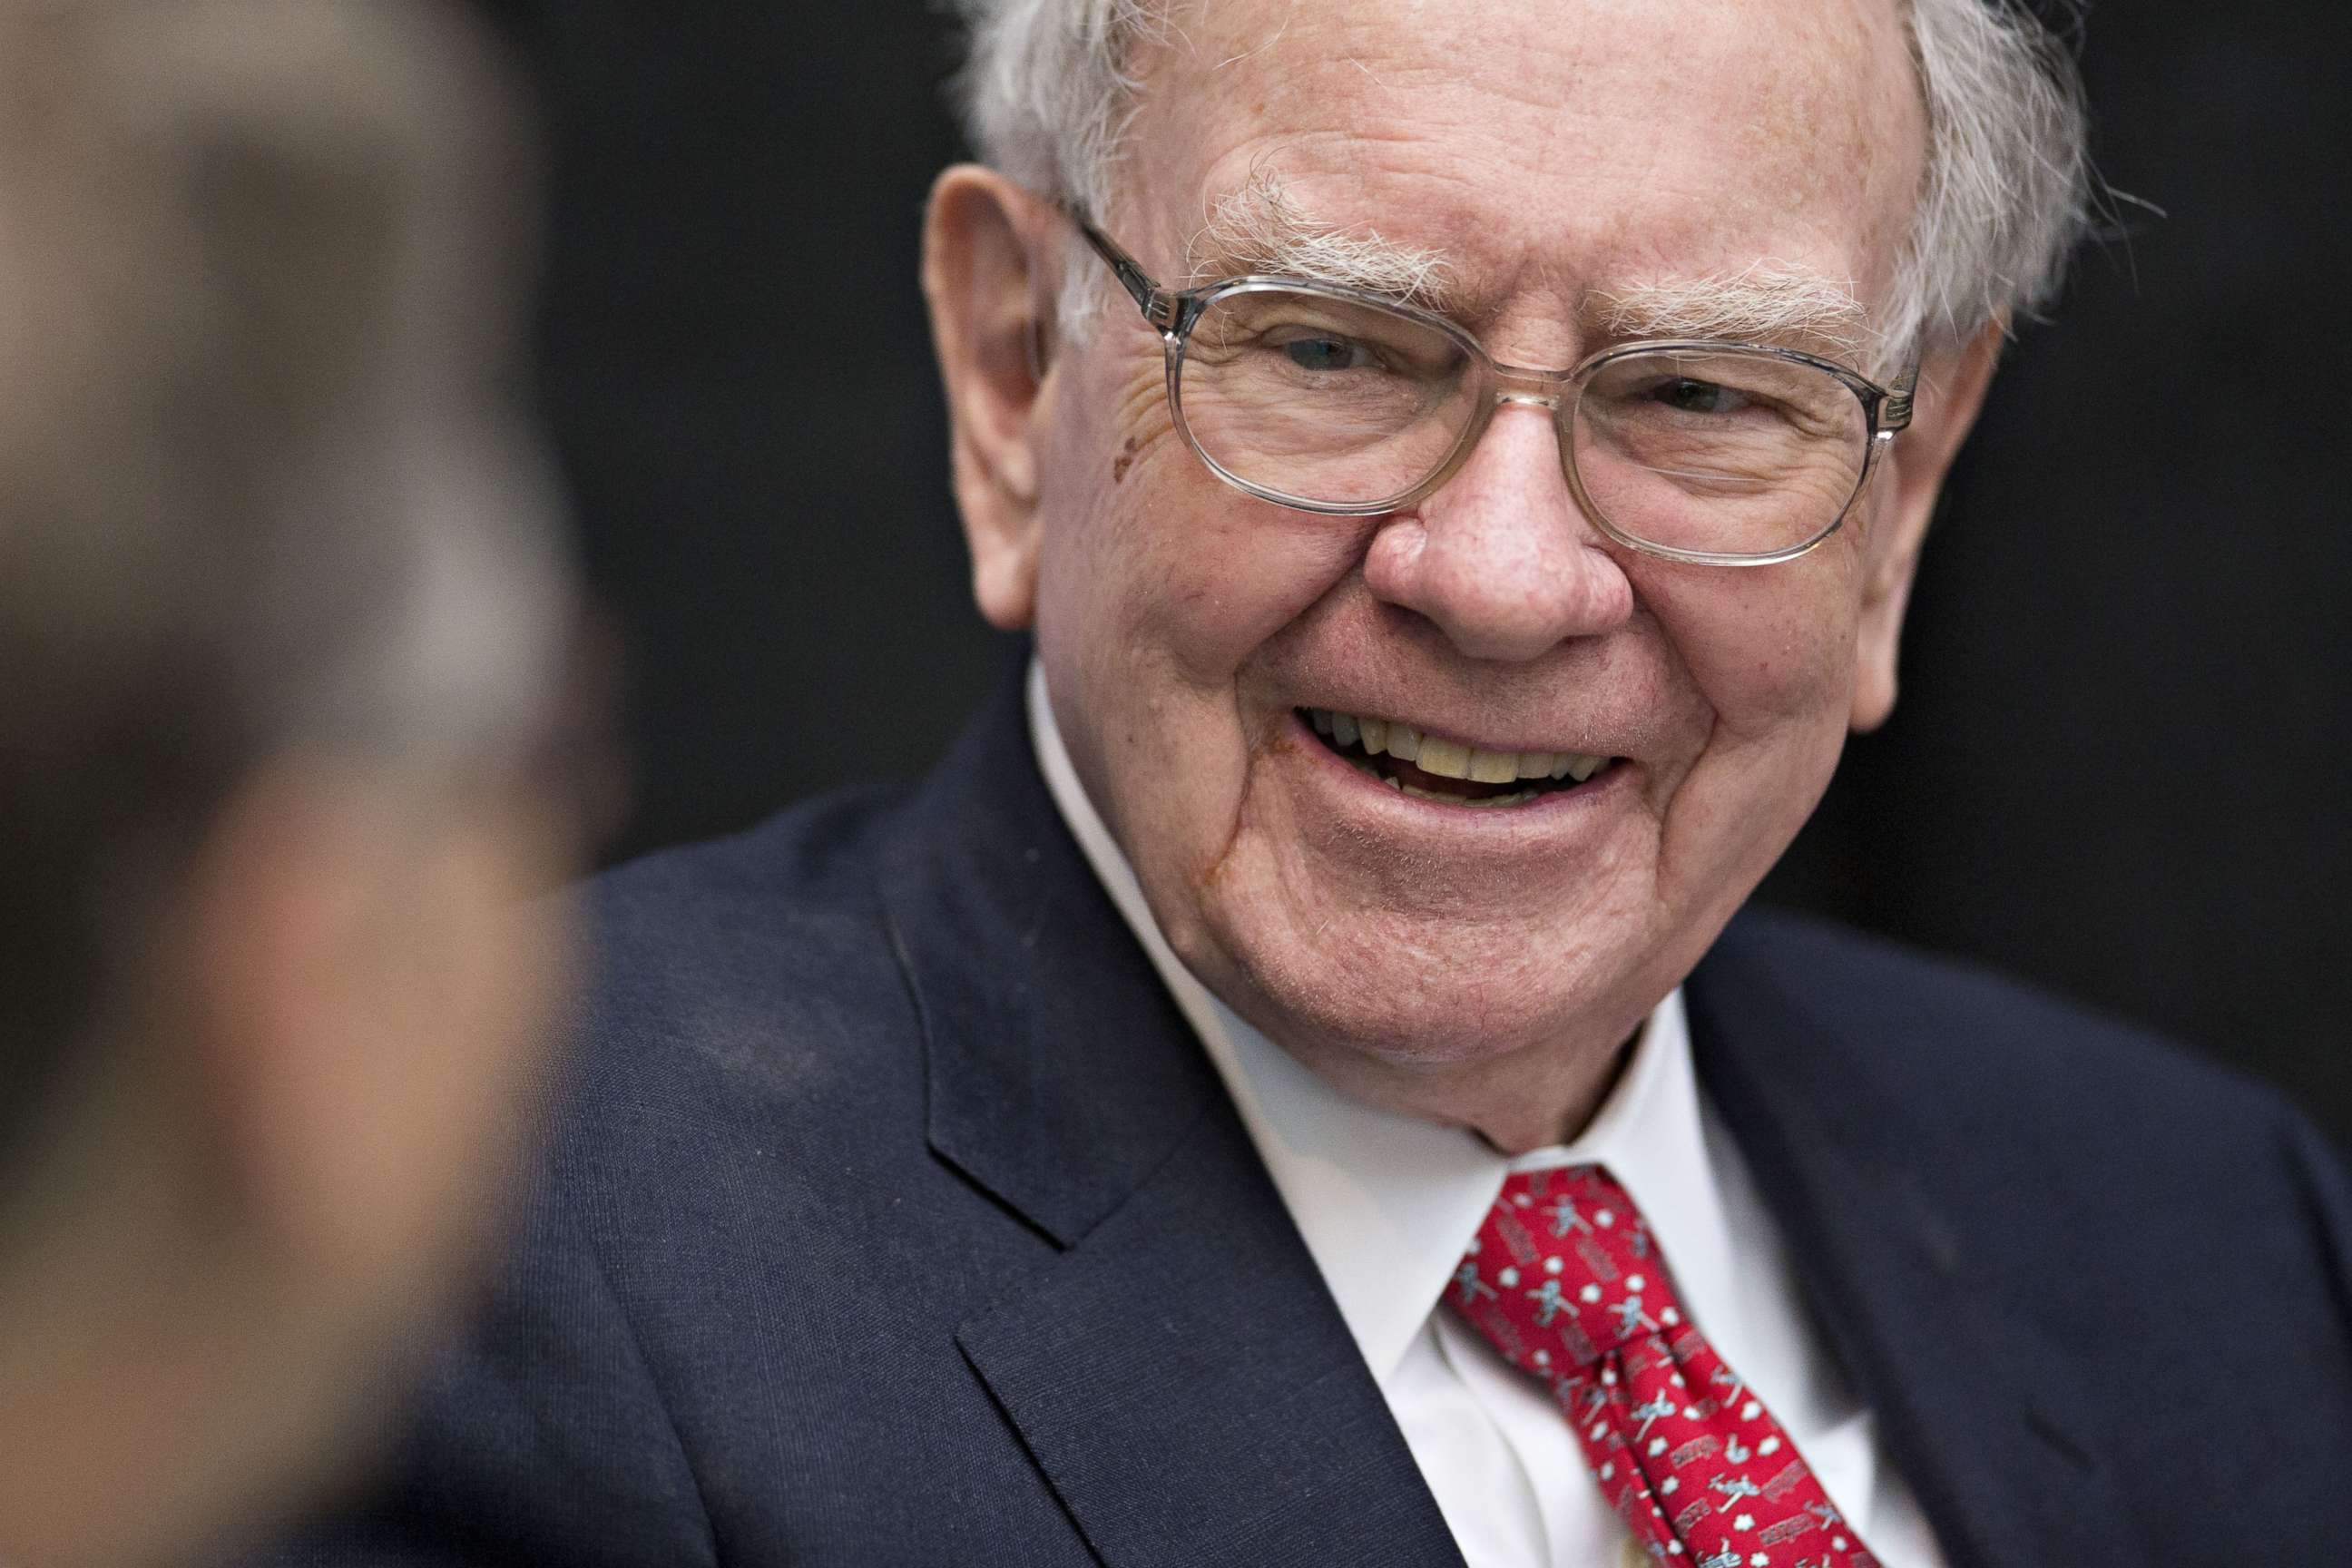 PHOTO: Warren Buffett, chairman and chief executive officer of Berkshire Hathaway Inc., laughs while playing cards on the sidelines the Berkshire Hathaway annual shareholders meeting in Omaha, Neb., May 1, 2016.